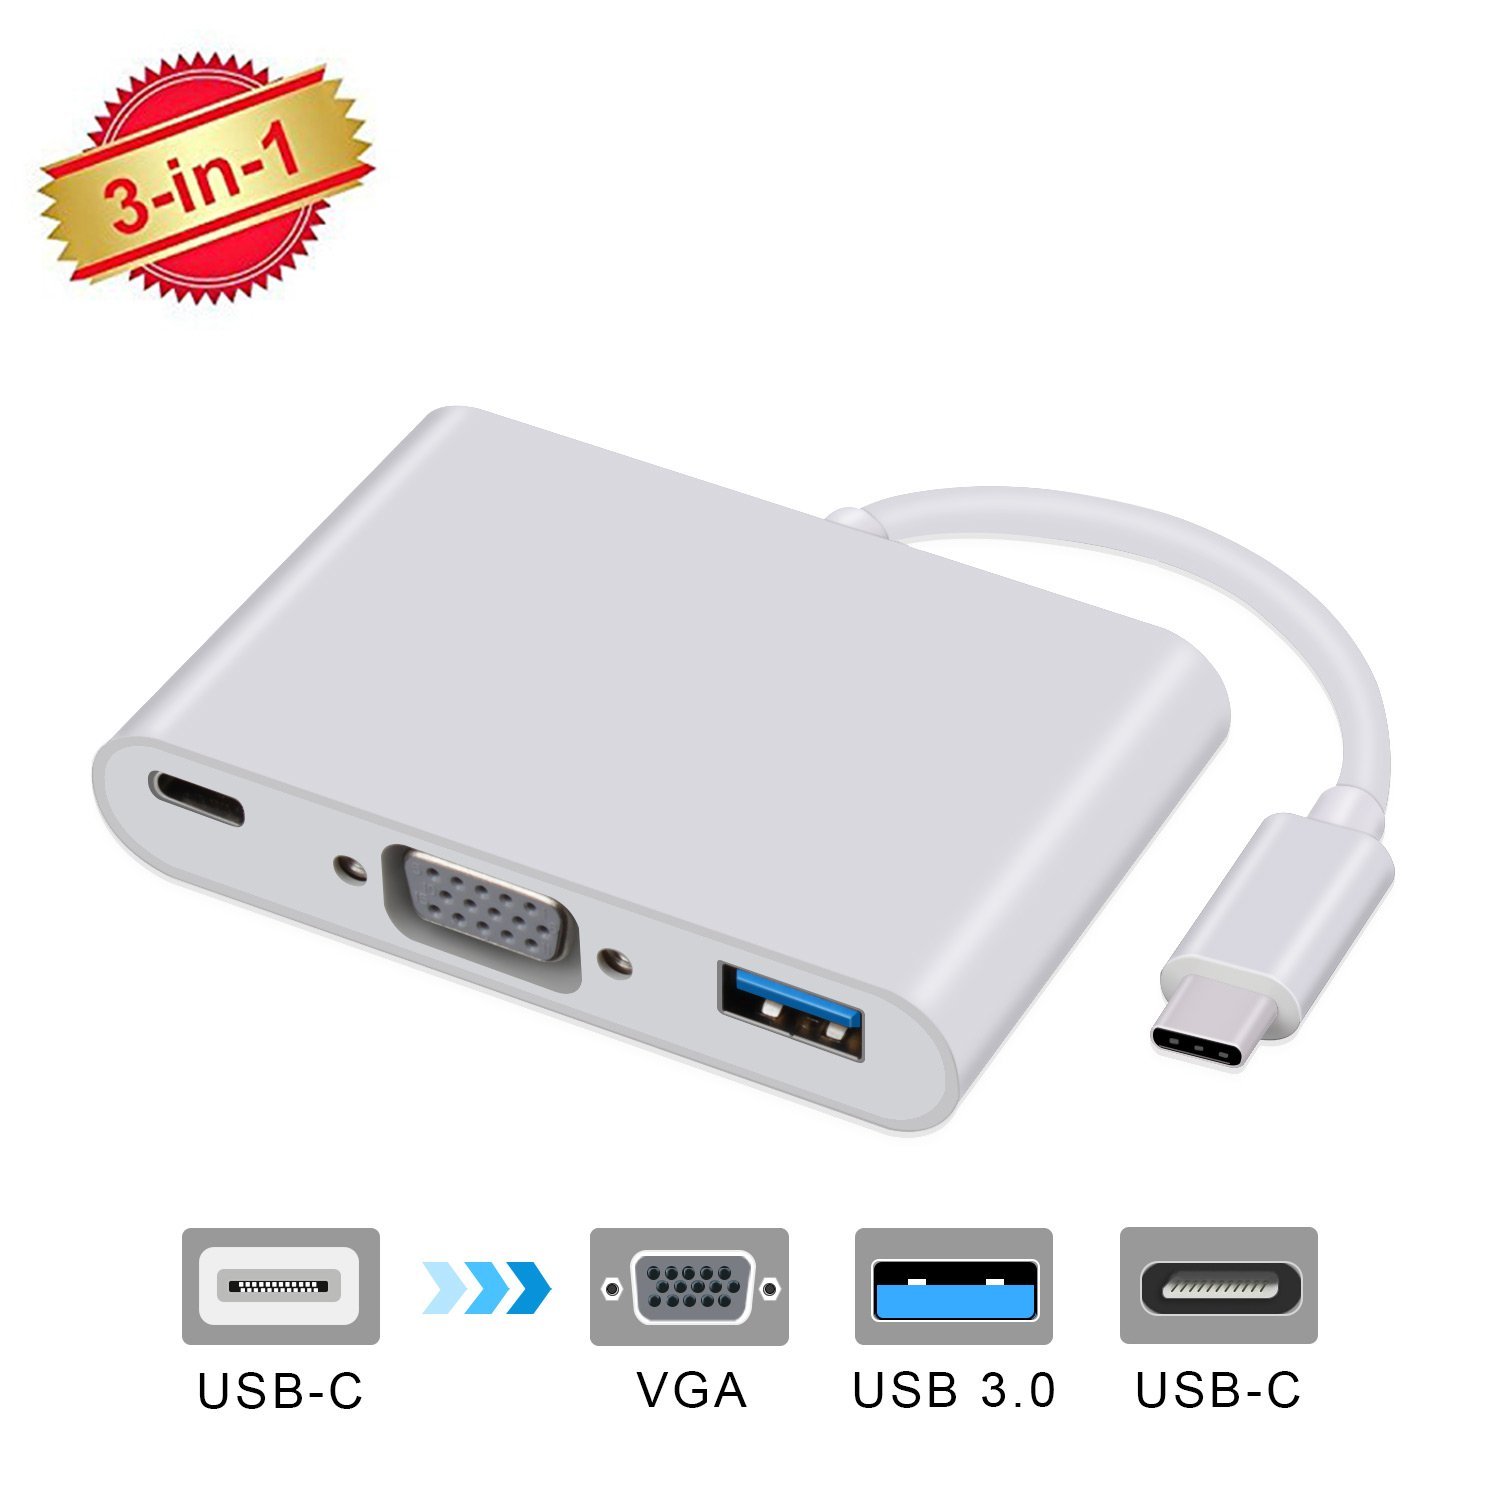 USB 3.1 Type C to VGA USB 3.0 Type C Female Charger Adapter Converter - Silver